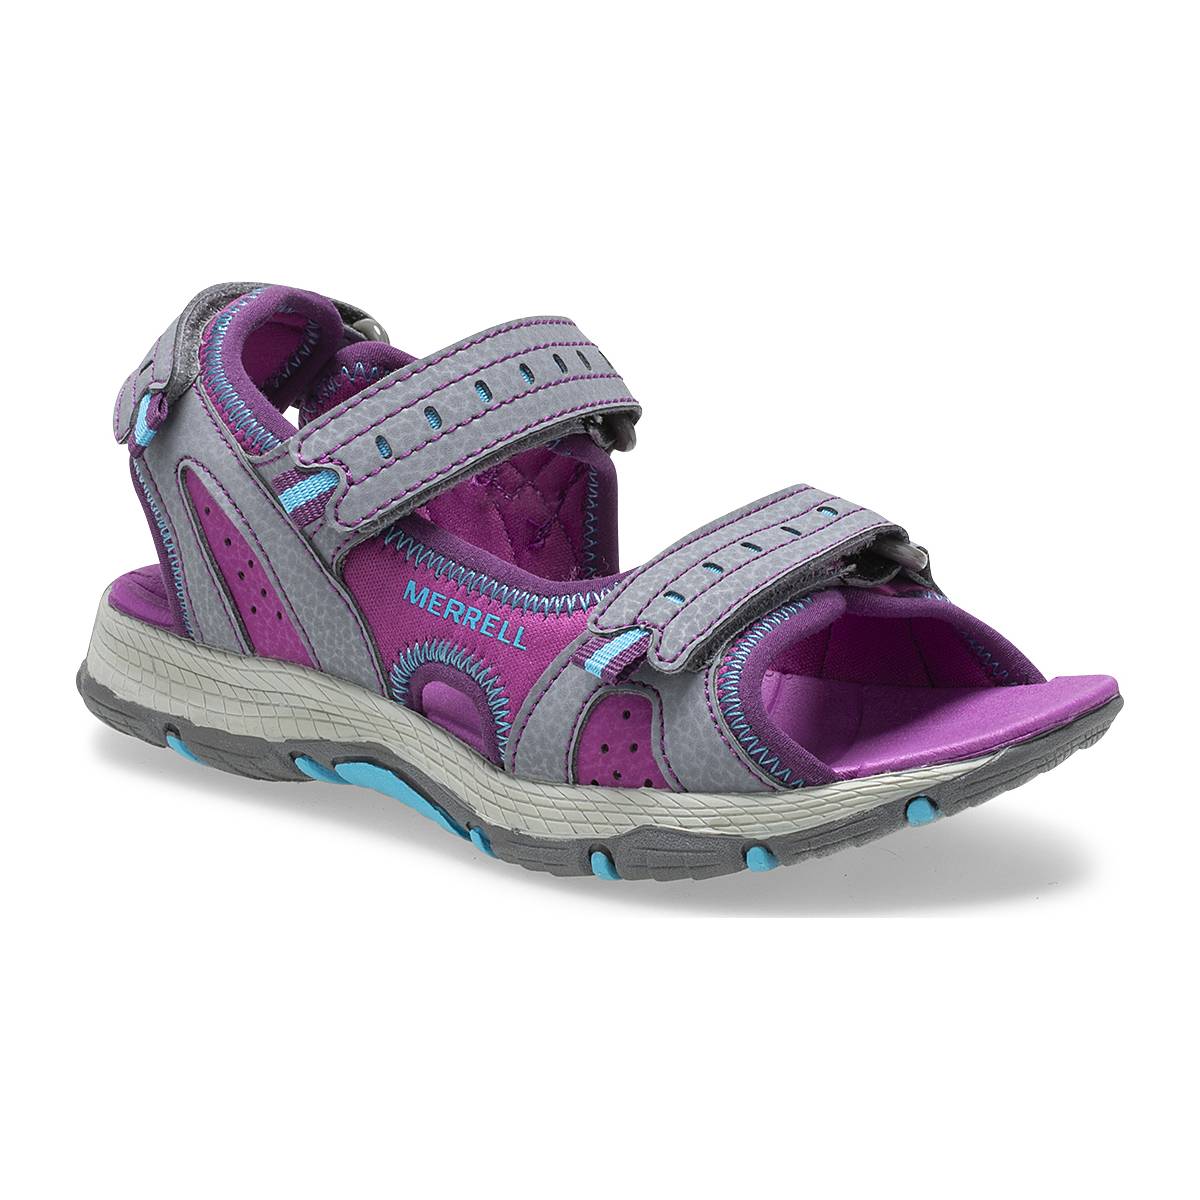 Image of Merrell Panther 2.0 Sandals Kids - grey